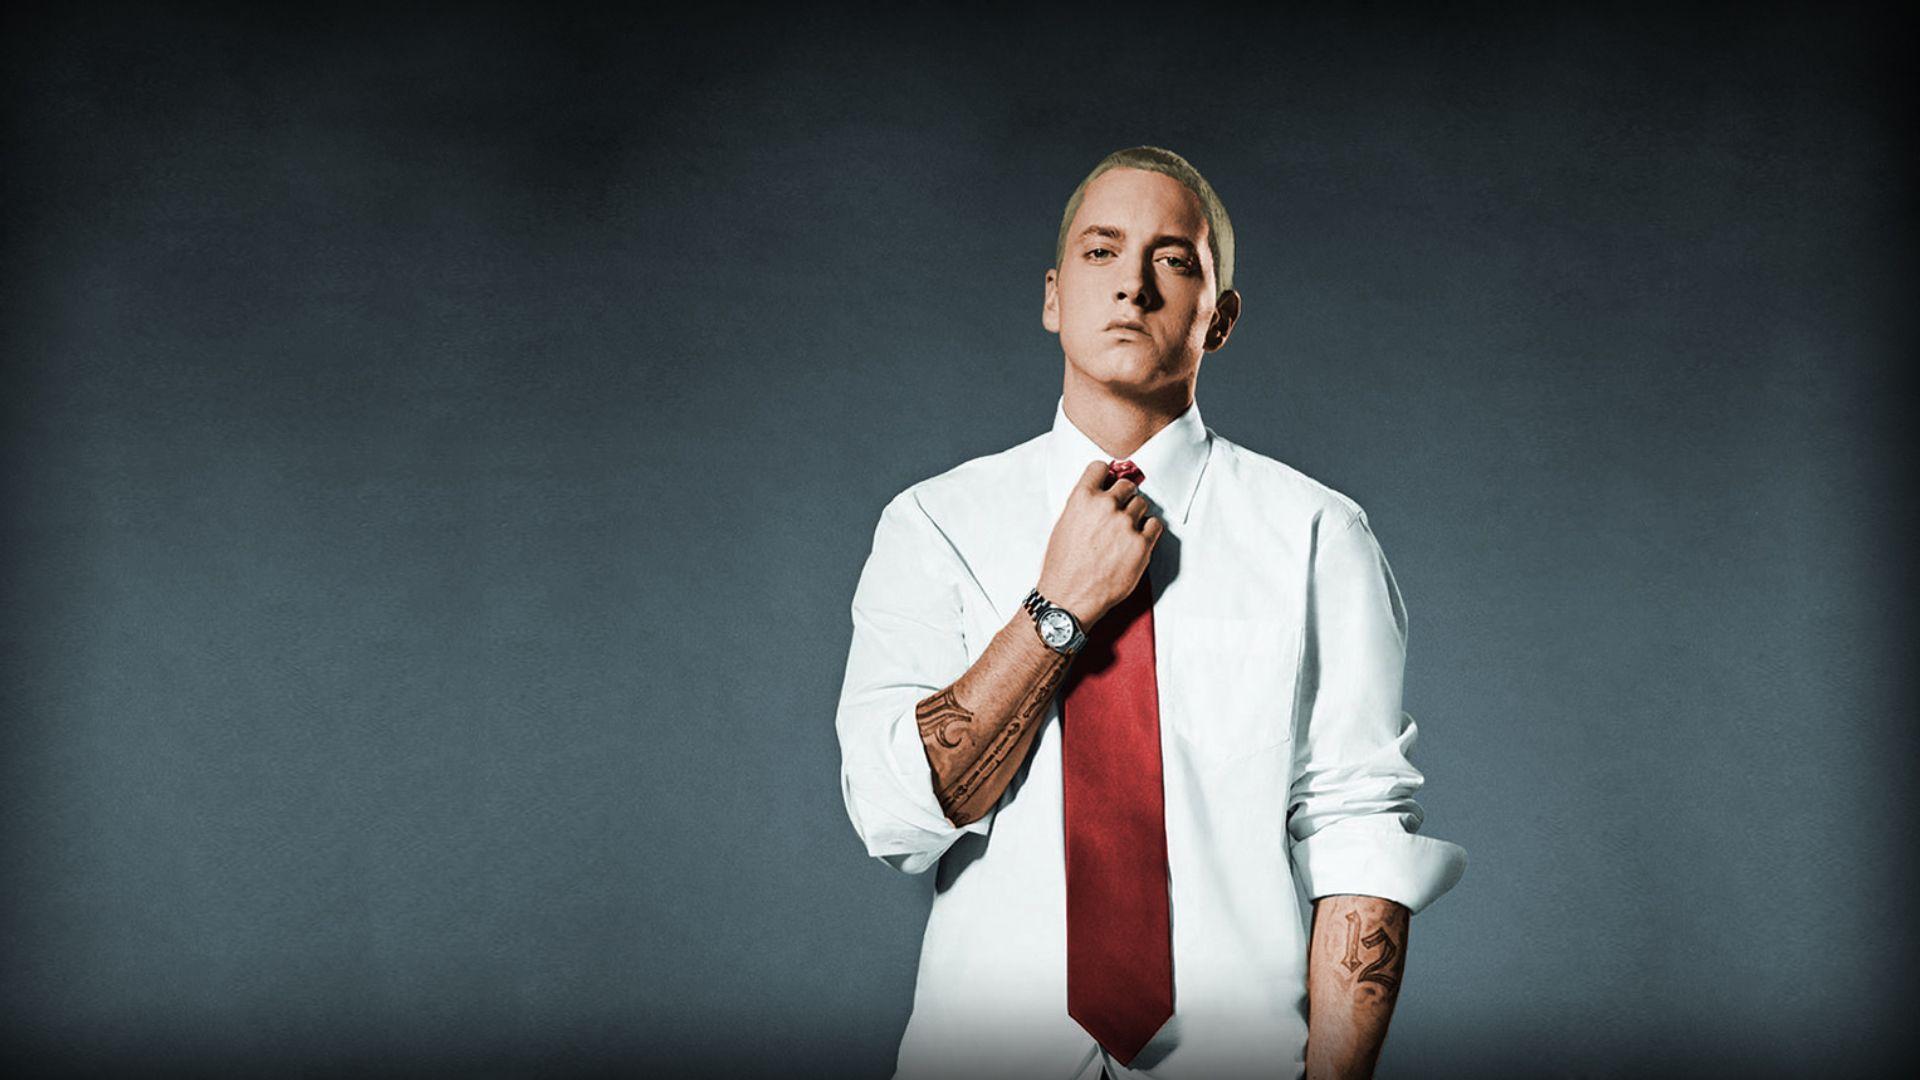 Eminem Wallpaper High Resolution and Quality Download